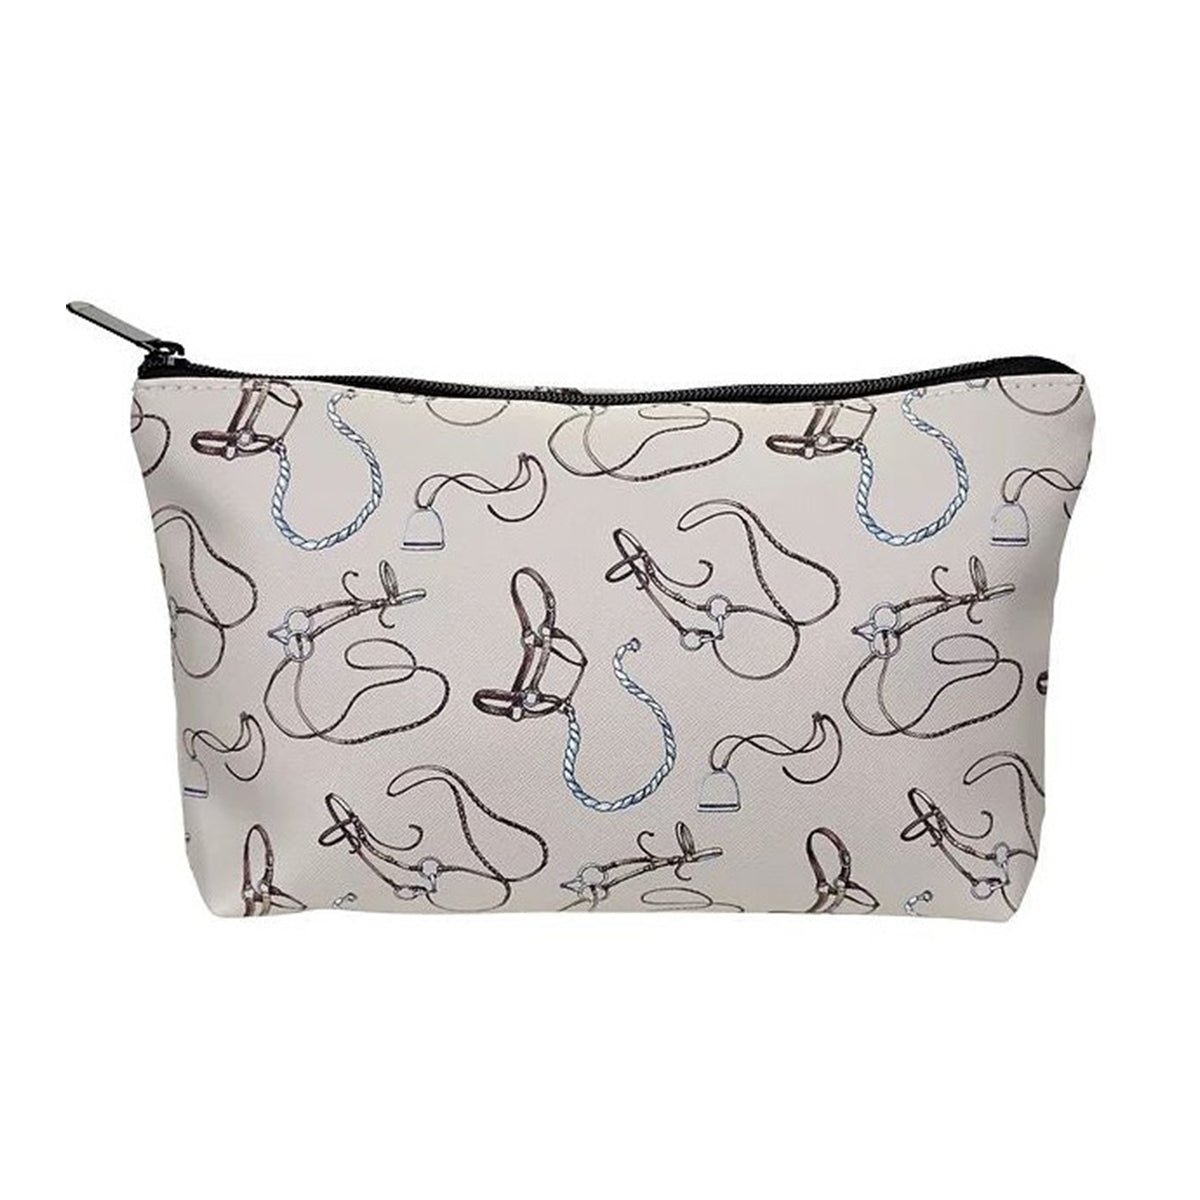 AWST Int'l "Lila" Bridles n' Things Cosmetic Pouch